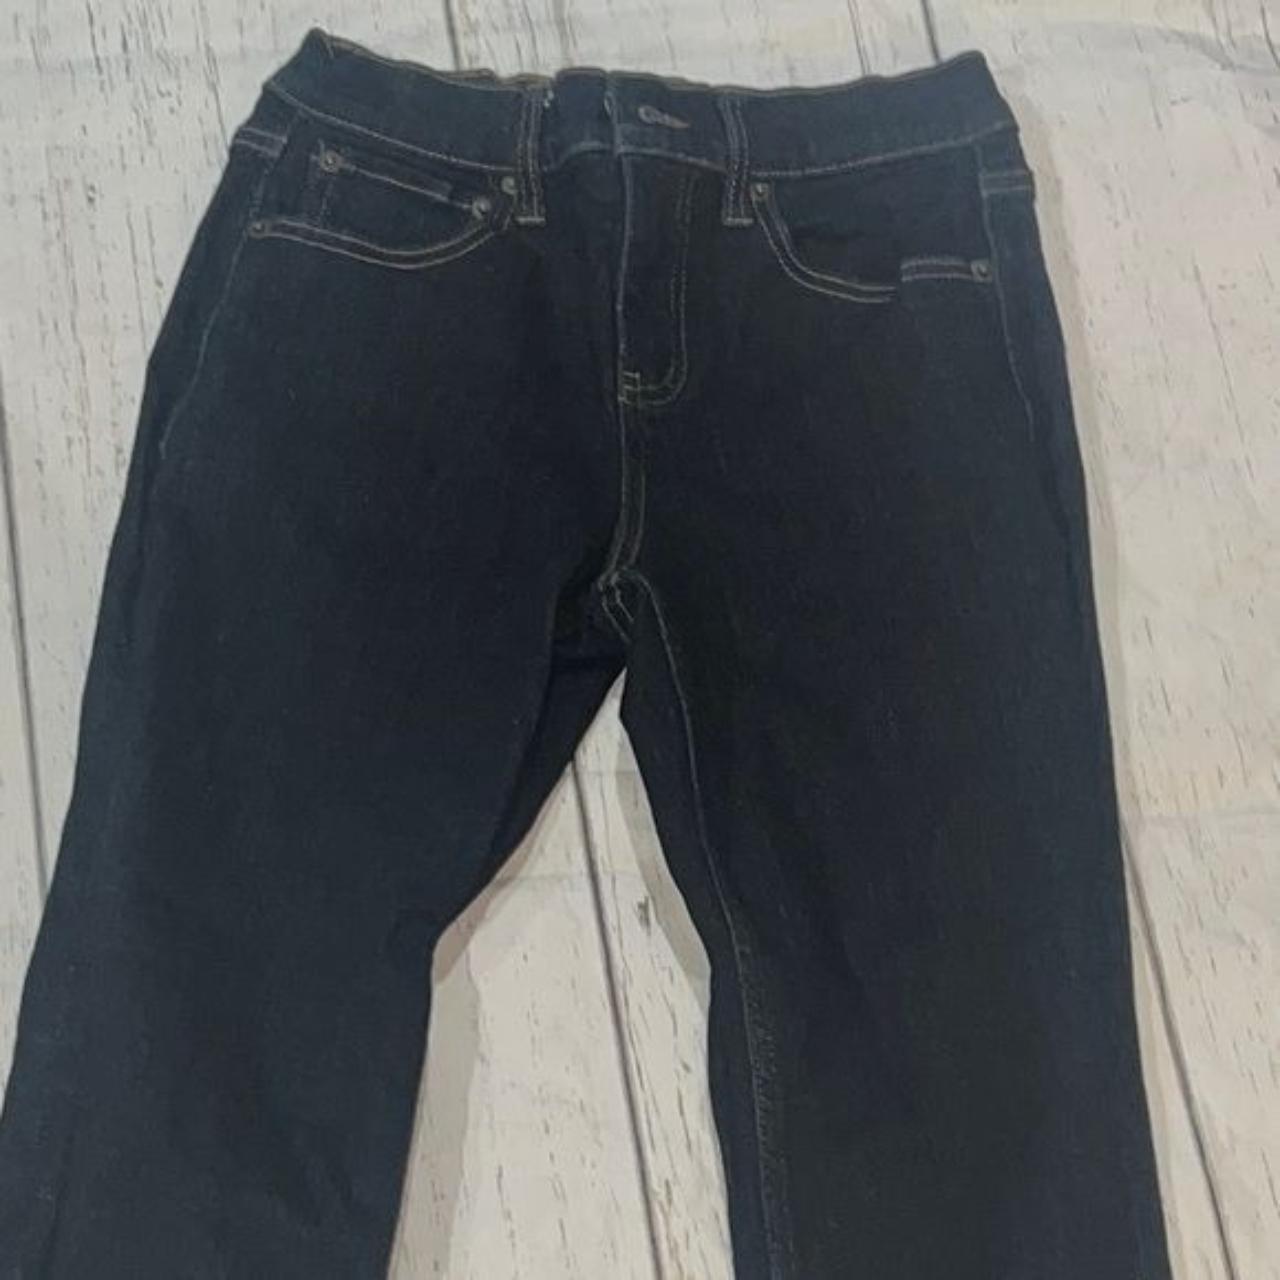 Rsq boys dark blue jeans In great condition size... - Depop